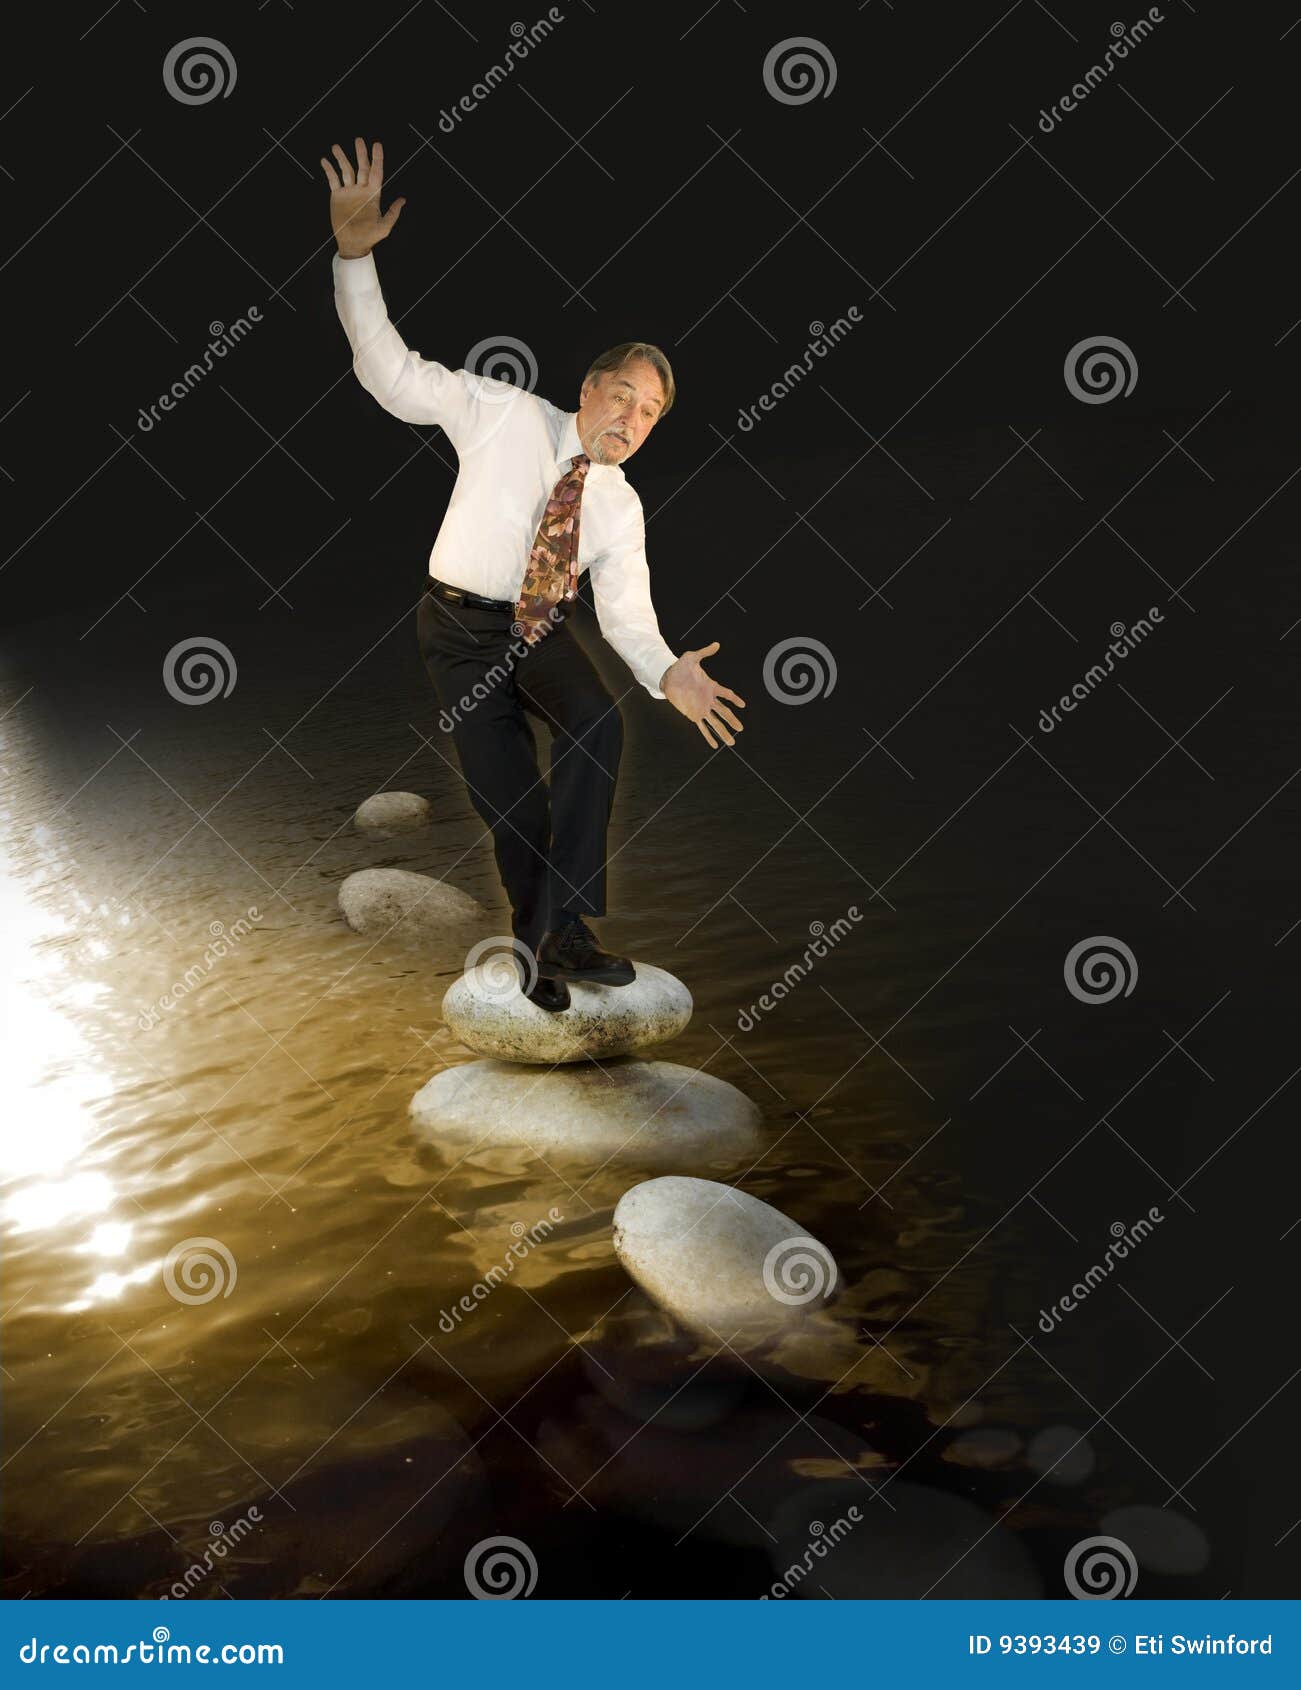 A man in a shirt and tie balances on rocks in black waters. Metaphor for risk and the difficulties of managing a business.